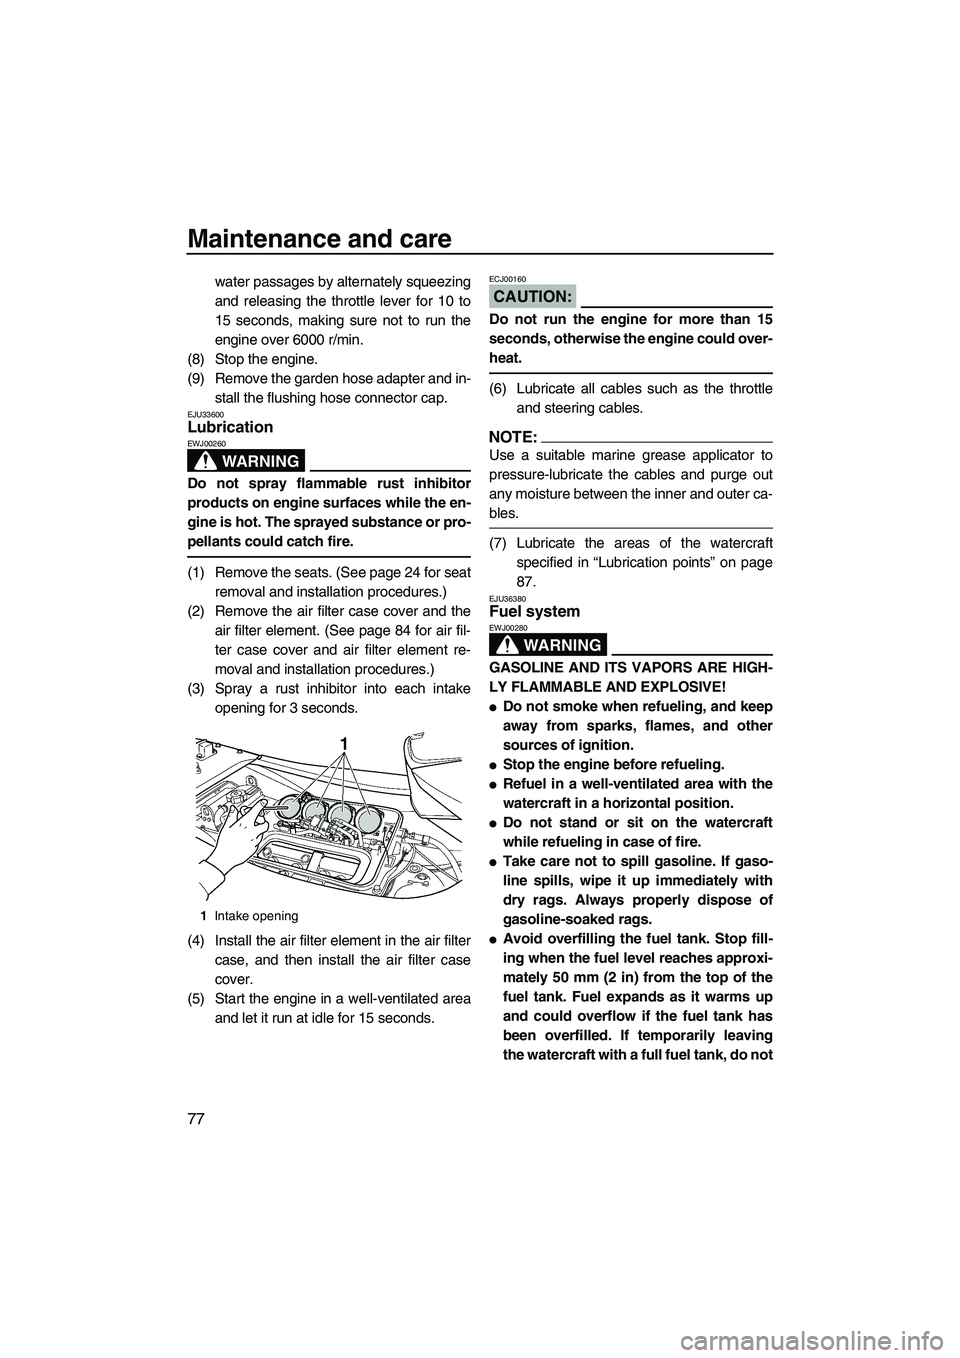 YAMAHA FX HO 2007  Owners Manual Maintenance and care
77
water passages by alternately squeezing
and releasing the throttle lever for 10 to
15 seconds, making sure not to run the
engine over 6000 r/min.
(8) Stop the engine.
(9) Remov